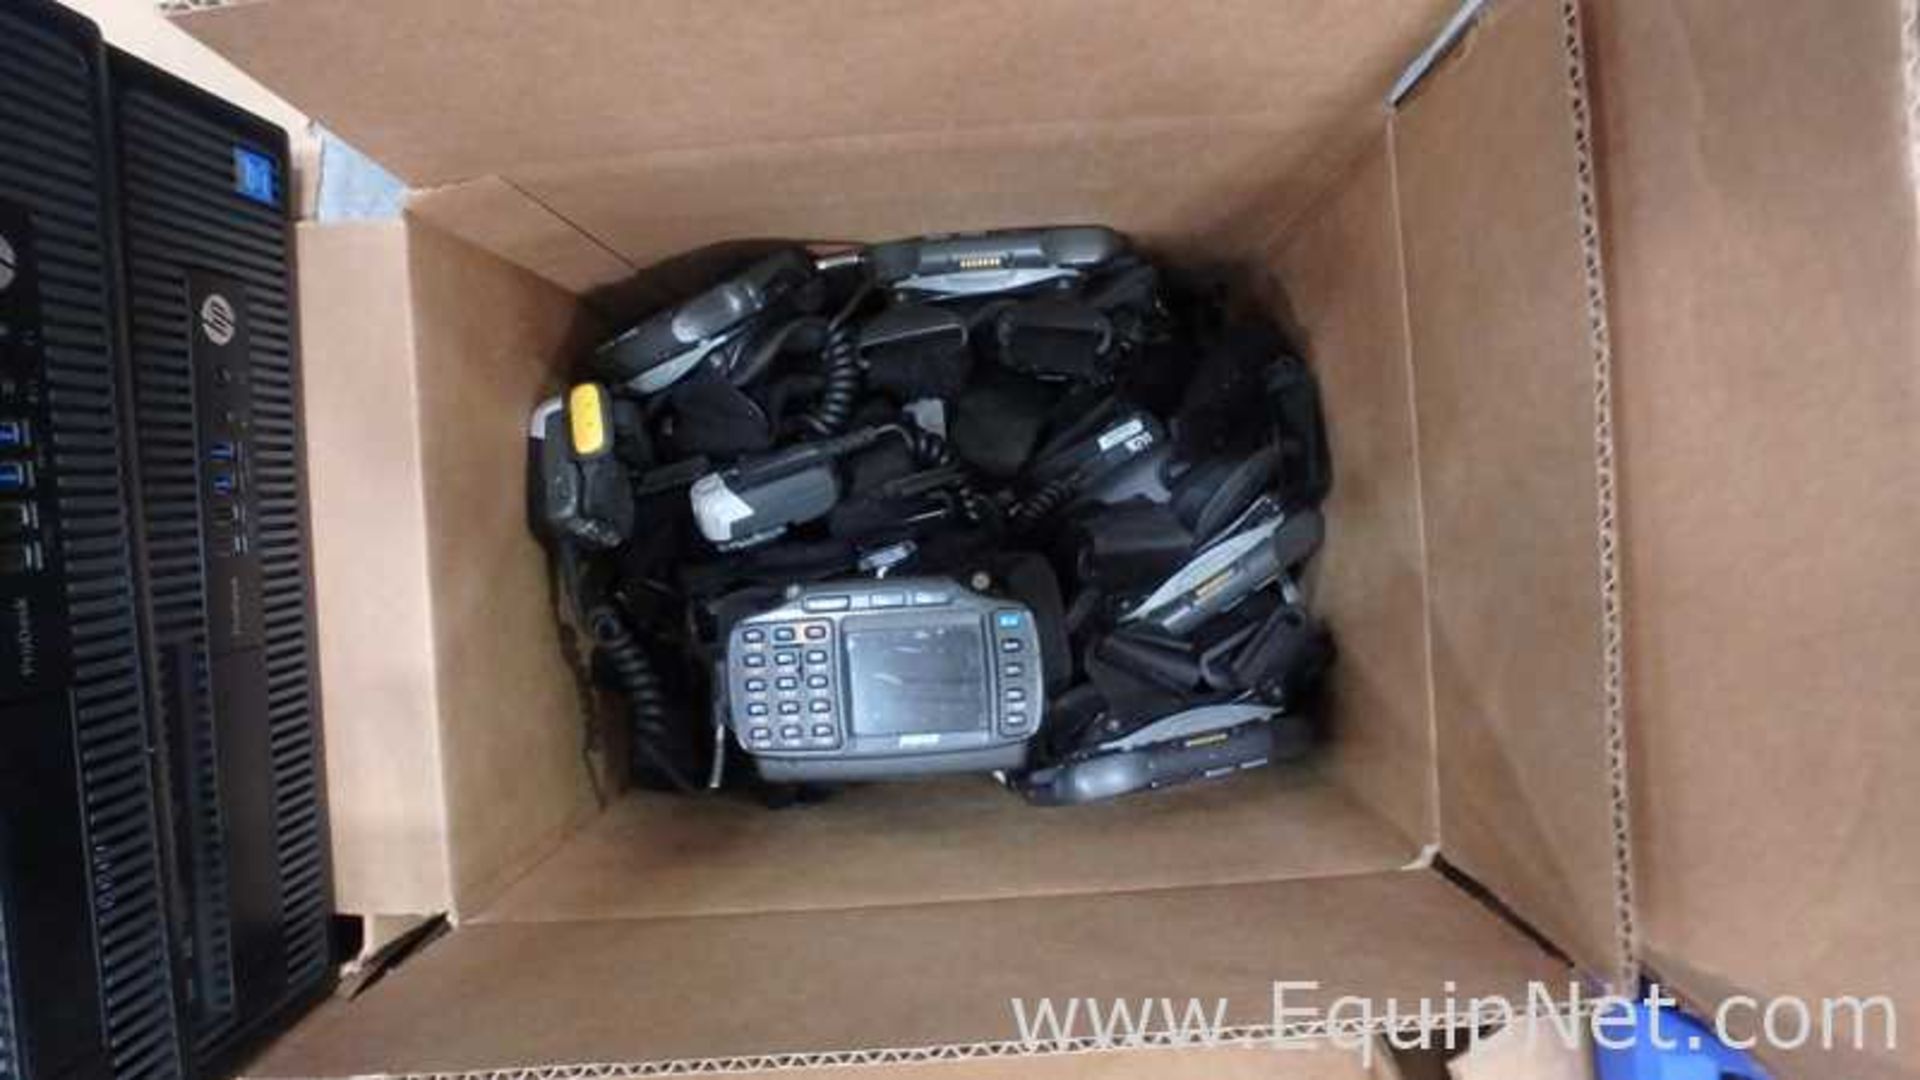 Lot of 1 Pallet Assorted Computer Accessories With Handheld Scanners Charger Station and Phones - Image 5 of 12